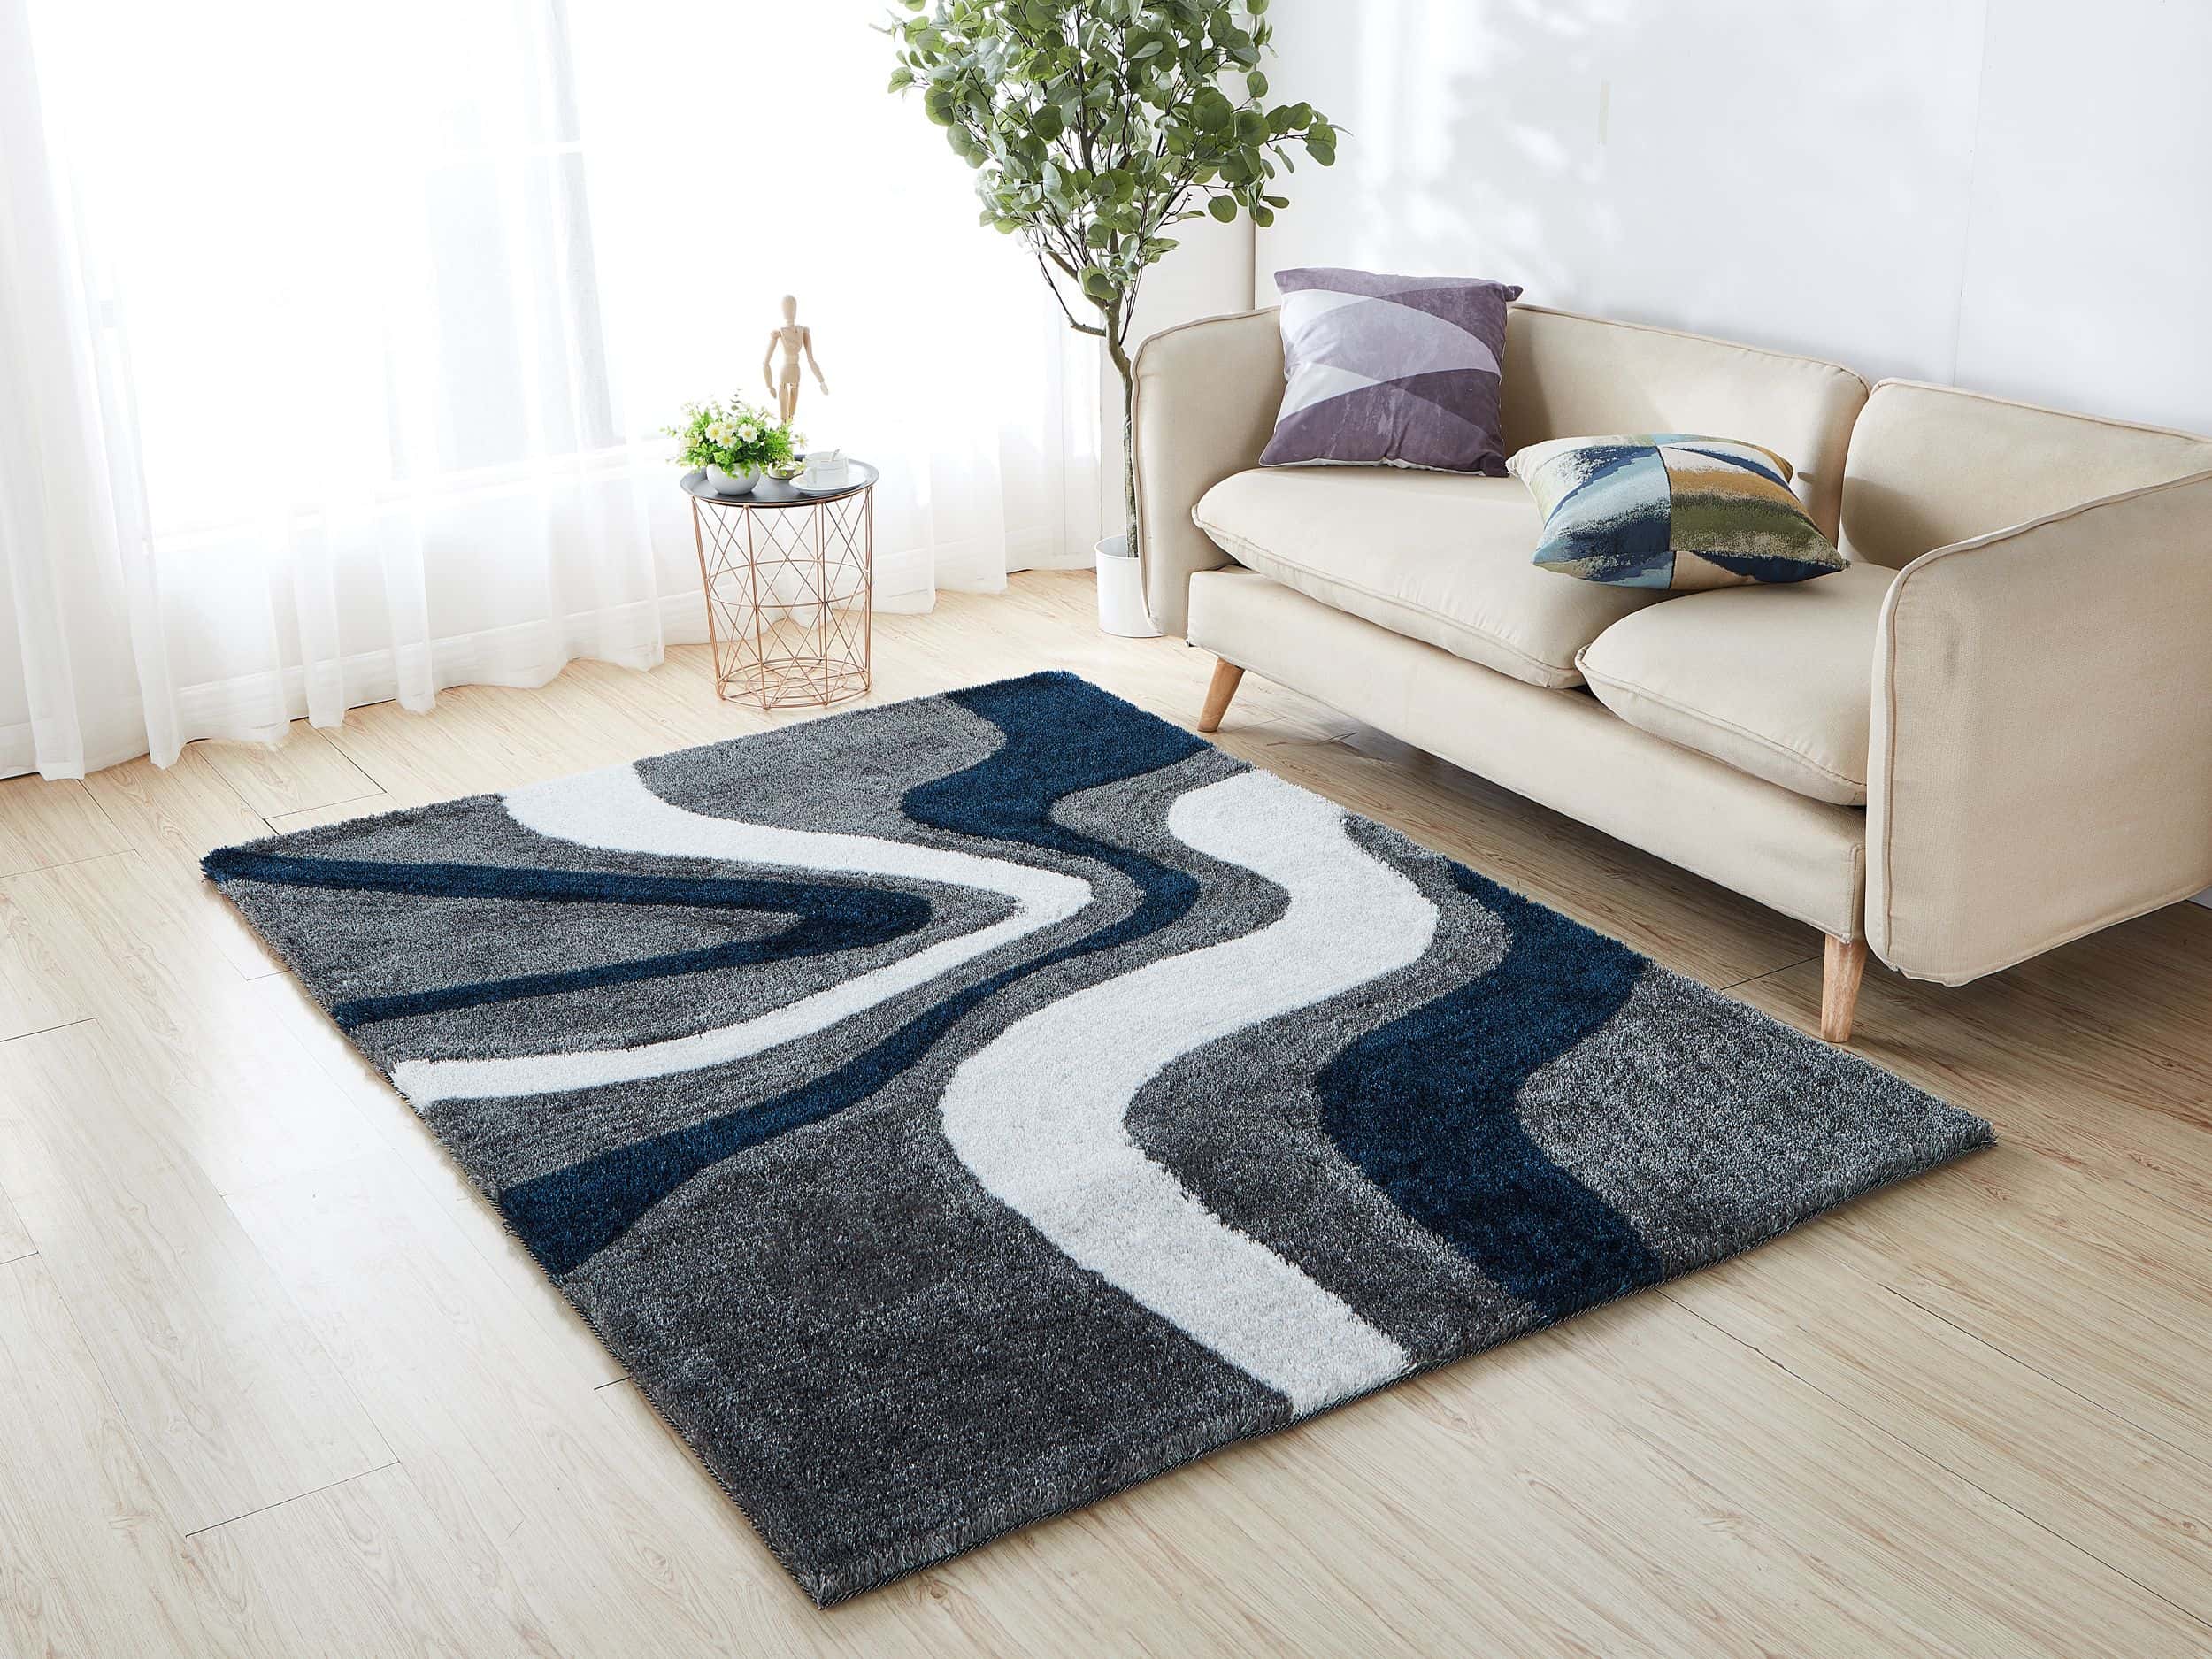 Aria Grey, Navy Blue & White Soft Pile Shaggy Area Rug by Amazing Rugs